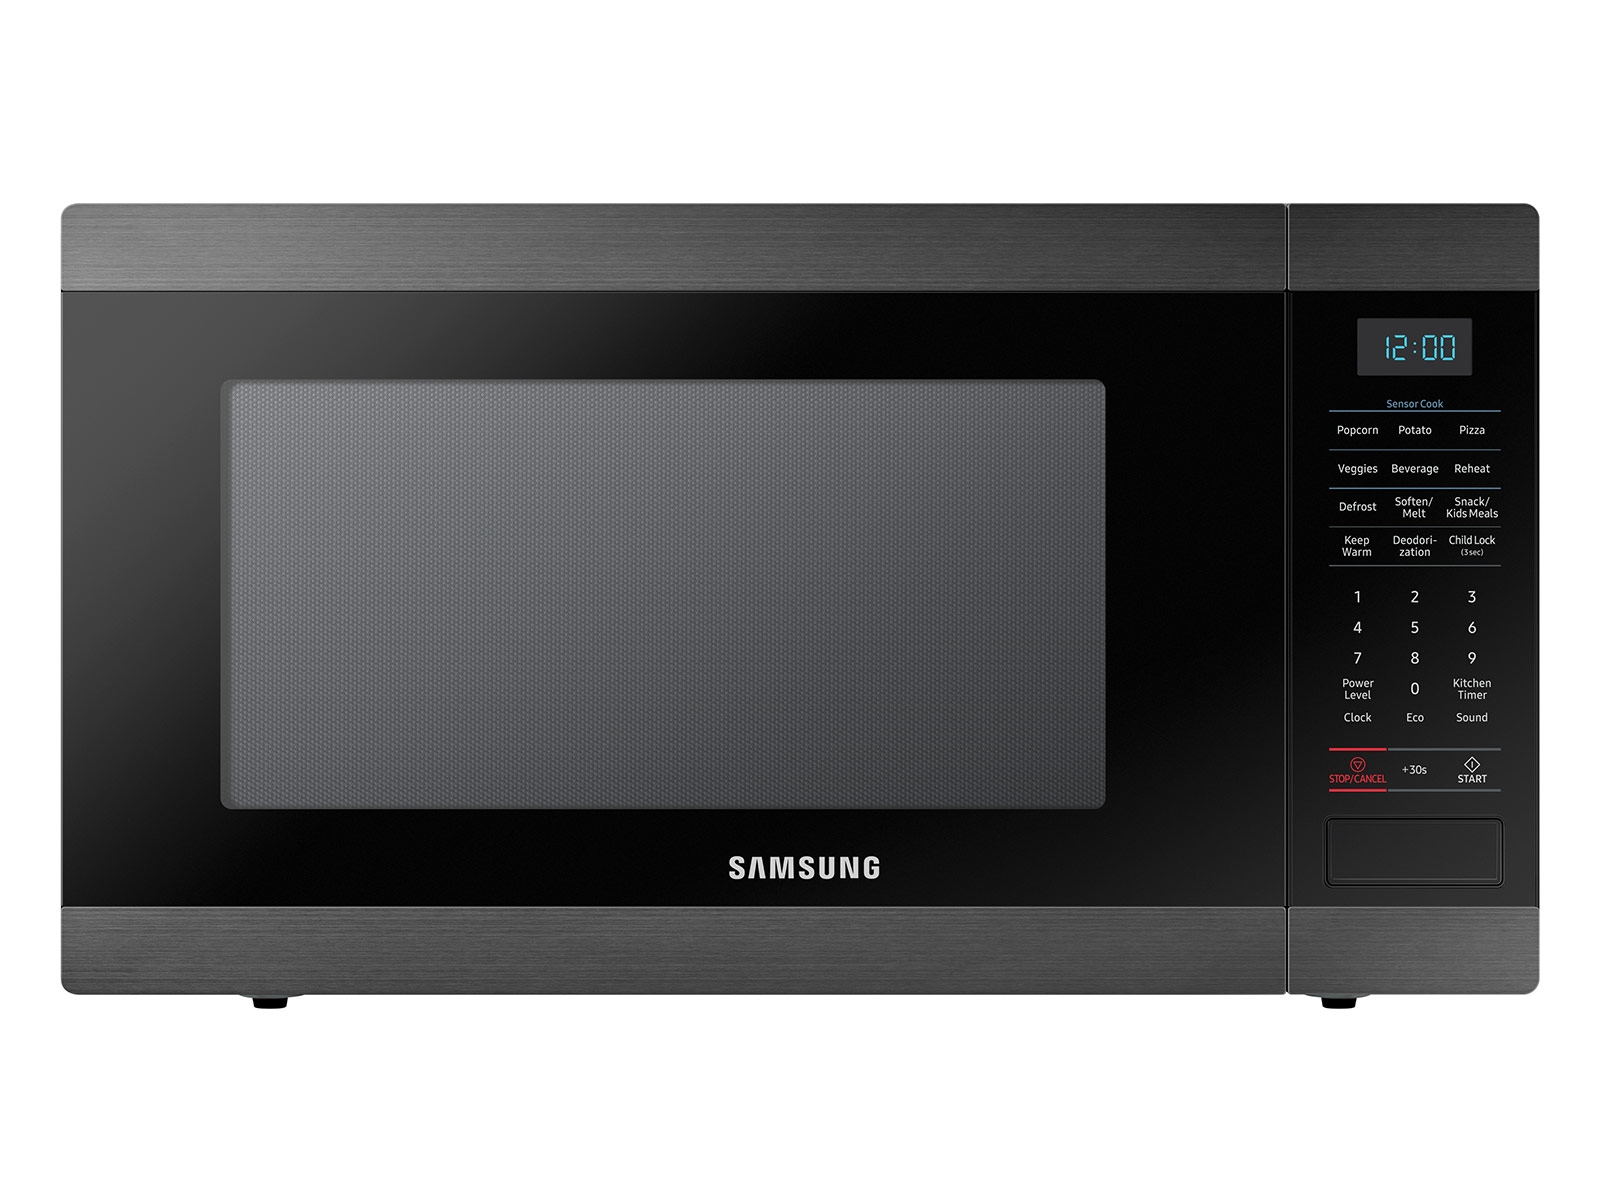 https://image-us.samsung.com/SamsungUS/home/home-appliances/microwaves/countertop/pdp/ms19m8000ag/gallery/020718/01_Microwave_MS19M8000AG_Front_Closed_Black.jpg?$product-details-jpg$